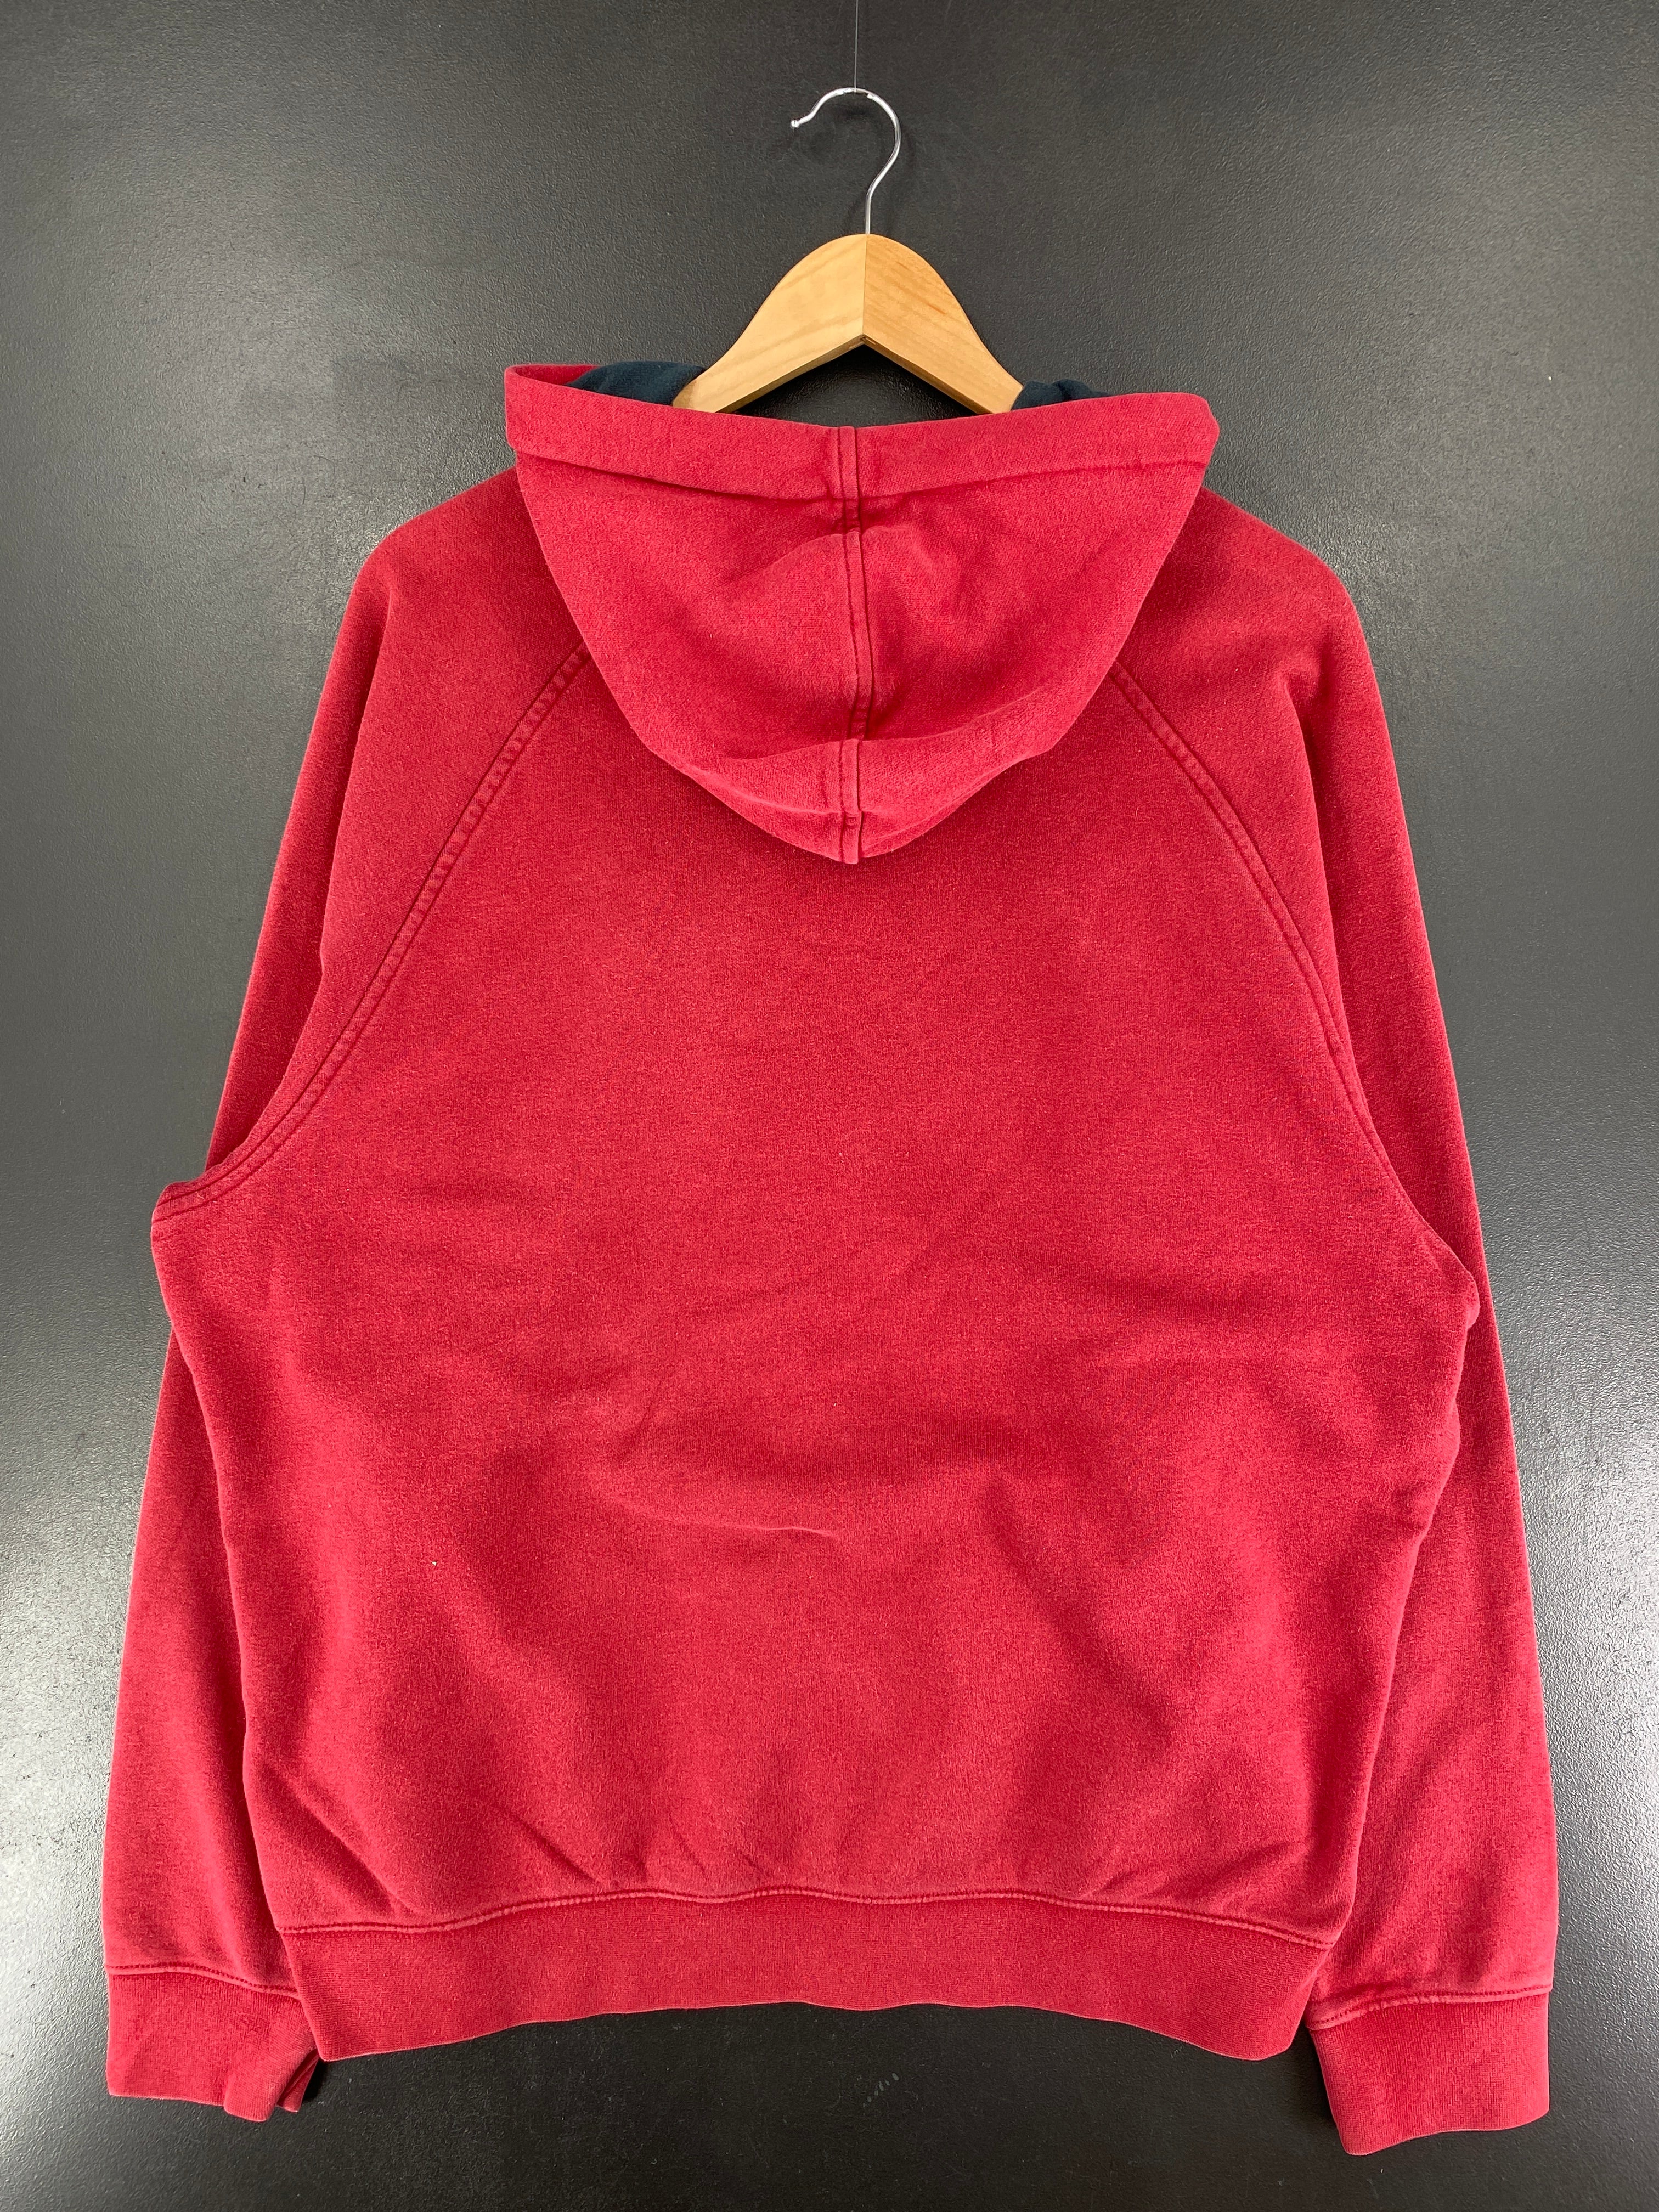 1960s Faded Red Hoodie Size Small 